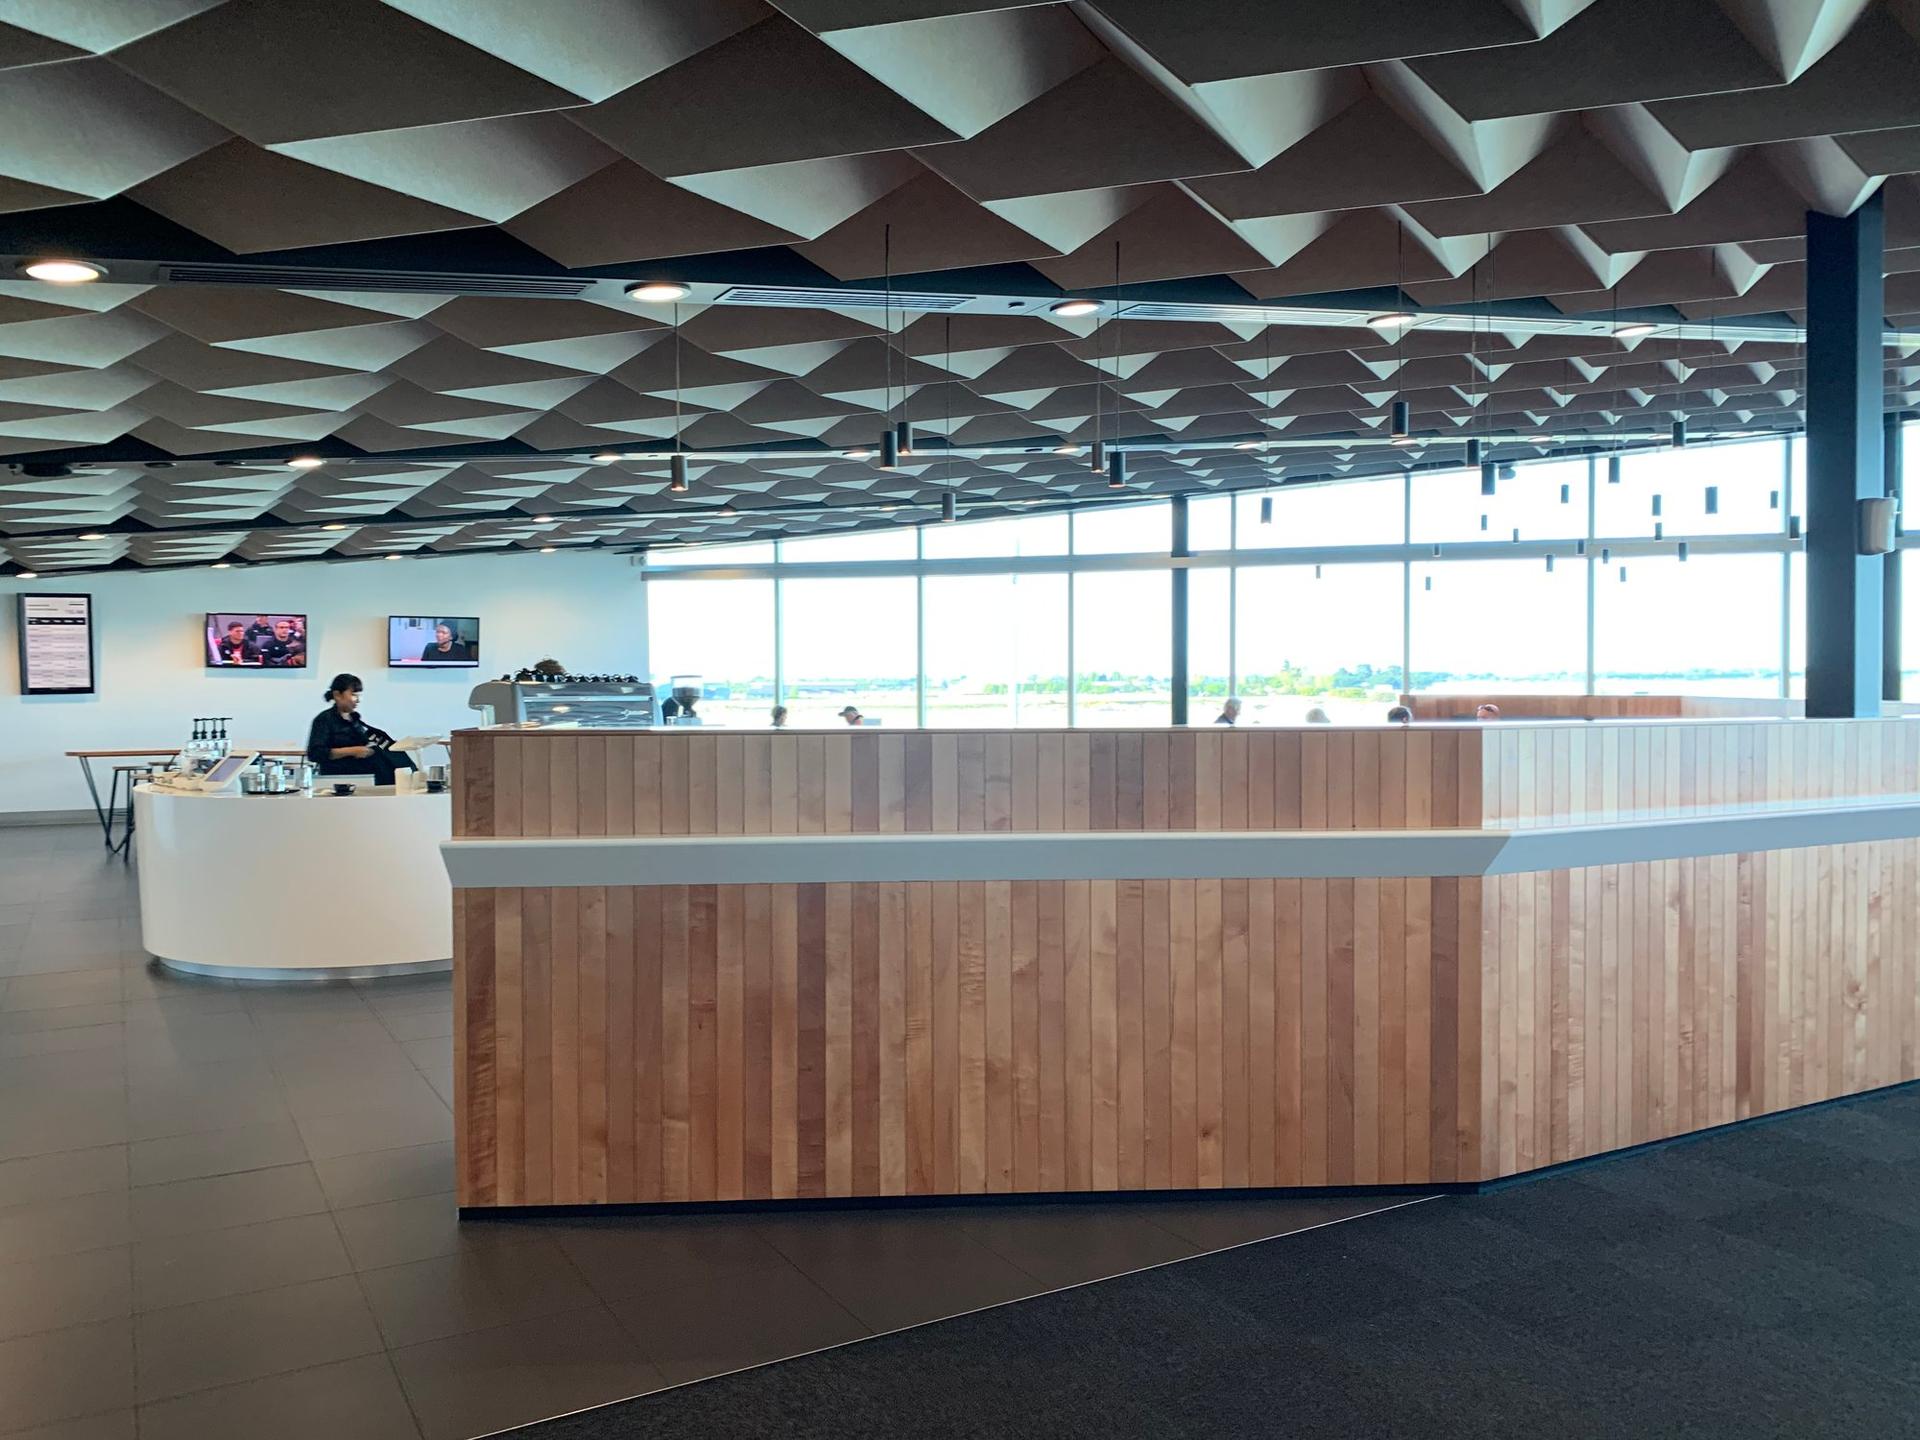 Air New Zealand Domestic Lounge image 5 of 6